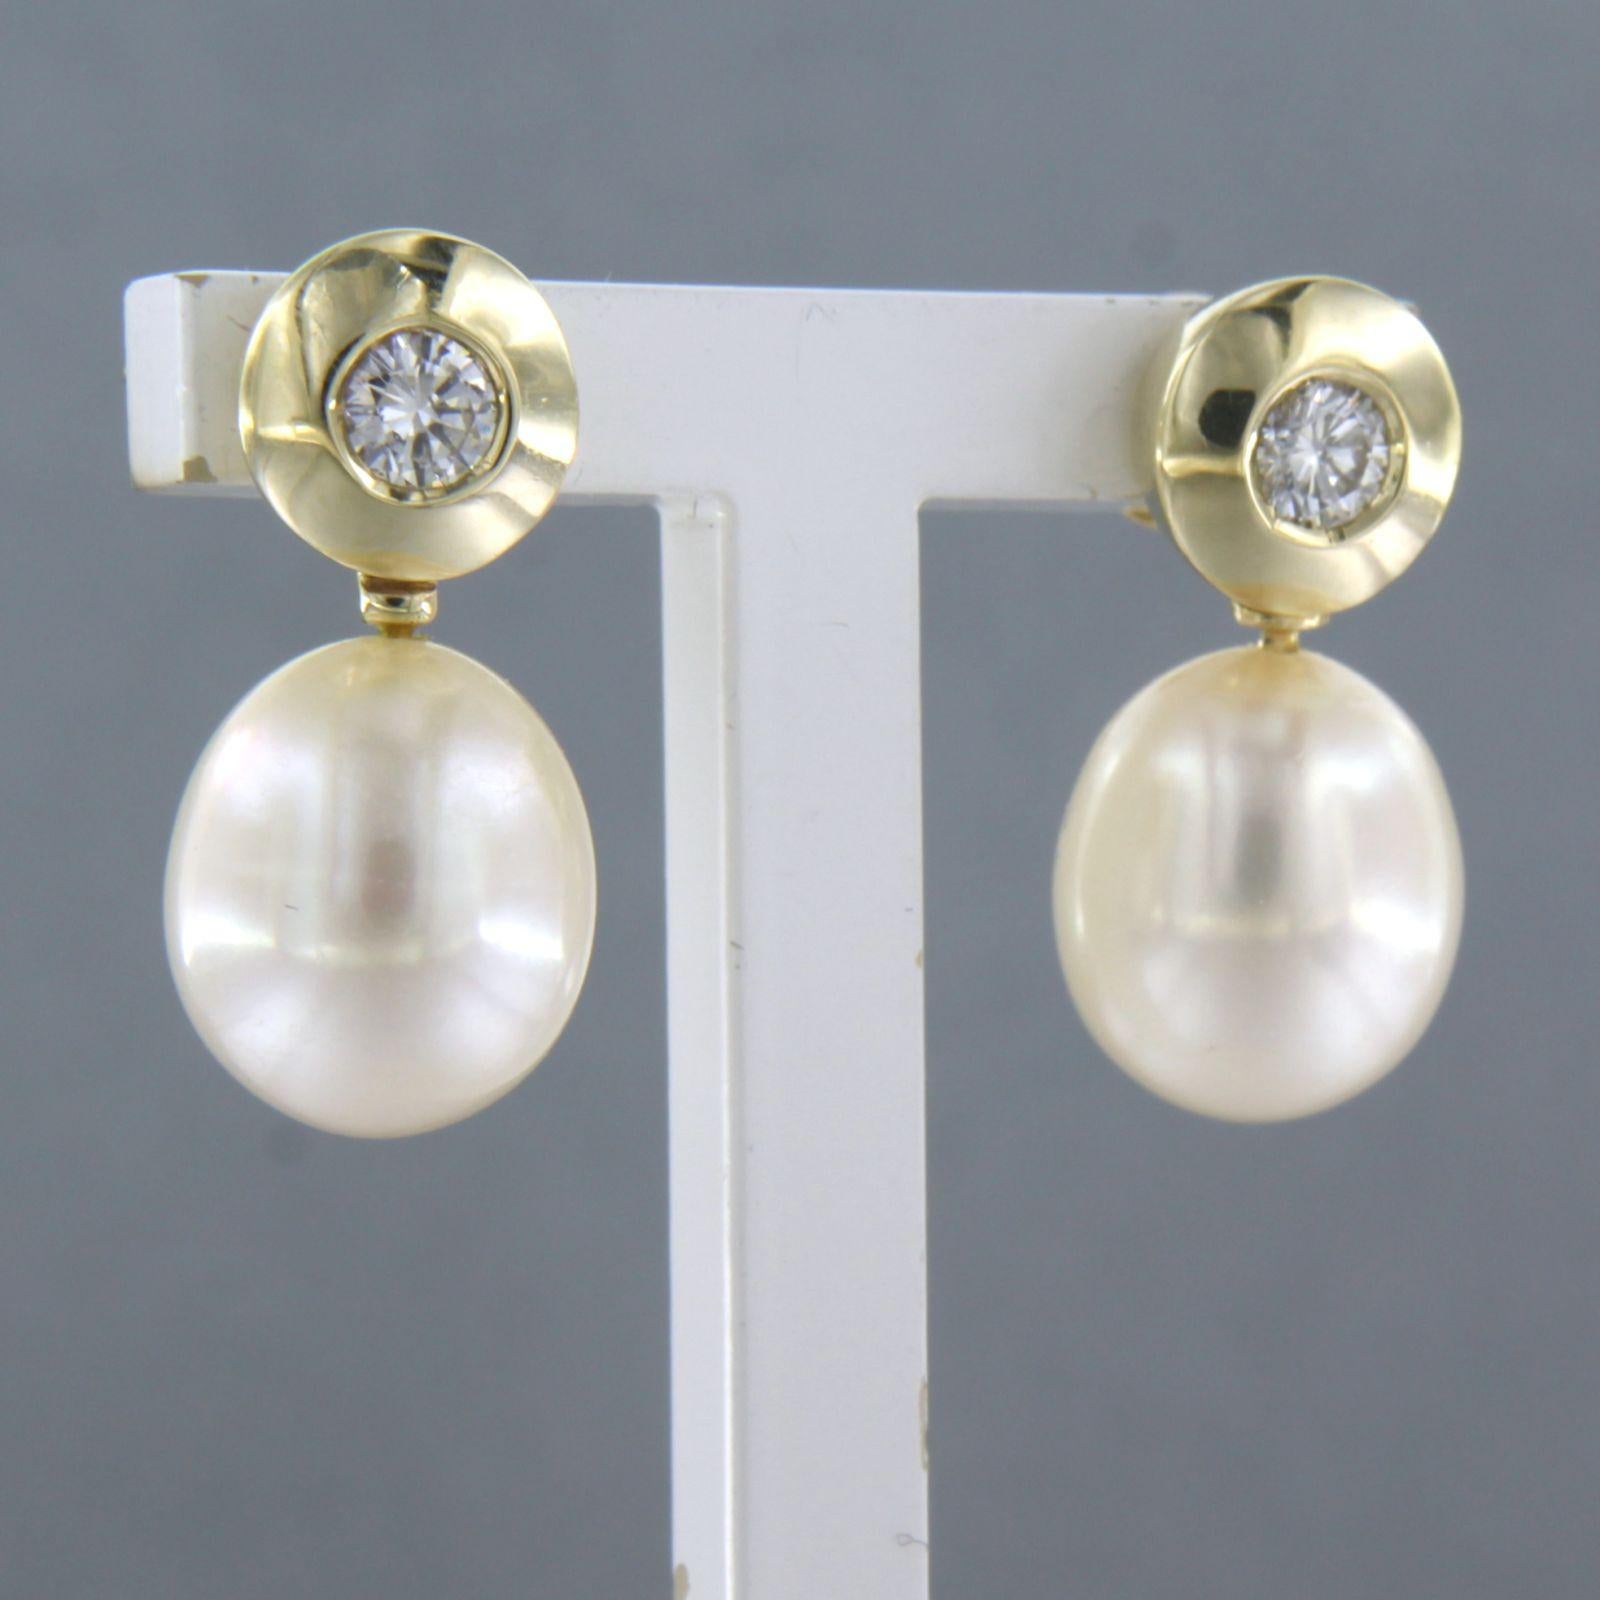 14k yellow gold earrings set with pearl and brilliant cut diamond 0.30ct - F/G - VS/SI

Detailed description:

The earrings are 2.0 cm high and 9.4 mm wide

Total weight 3.1 grams

set with

- 2 x 1.1 cm x 9.4 mm freshwater pearl

colour